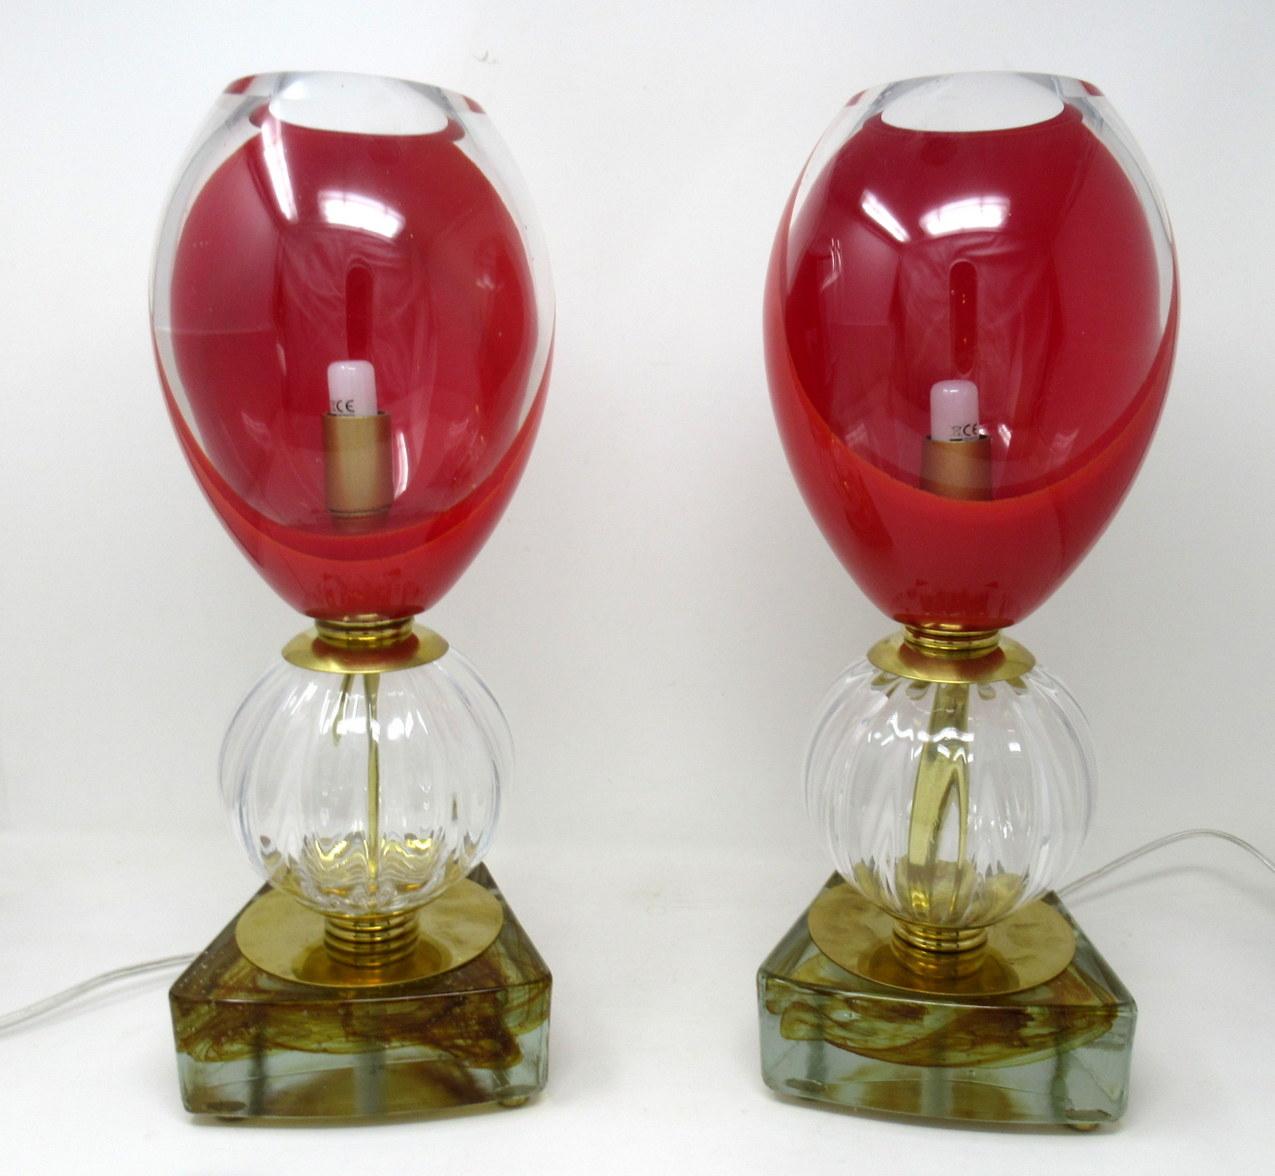 An exceptional and stylish pair of midcentury Italian Murano glass electric table lamps, circa 1950s-1960s

The bulbous body in clear ribbed glass, below a very heavy gauge egg-form glass shade, part clear and part rich red, supported by a shaped